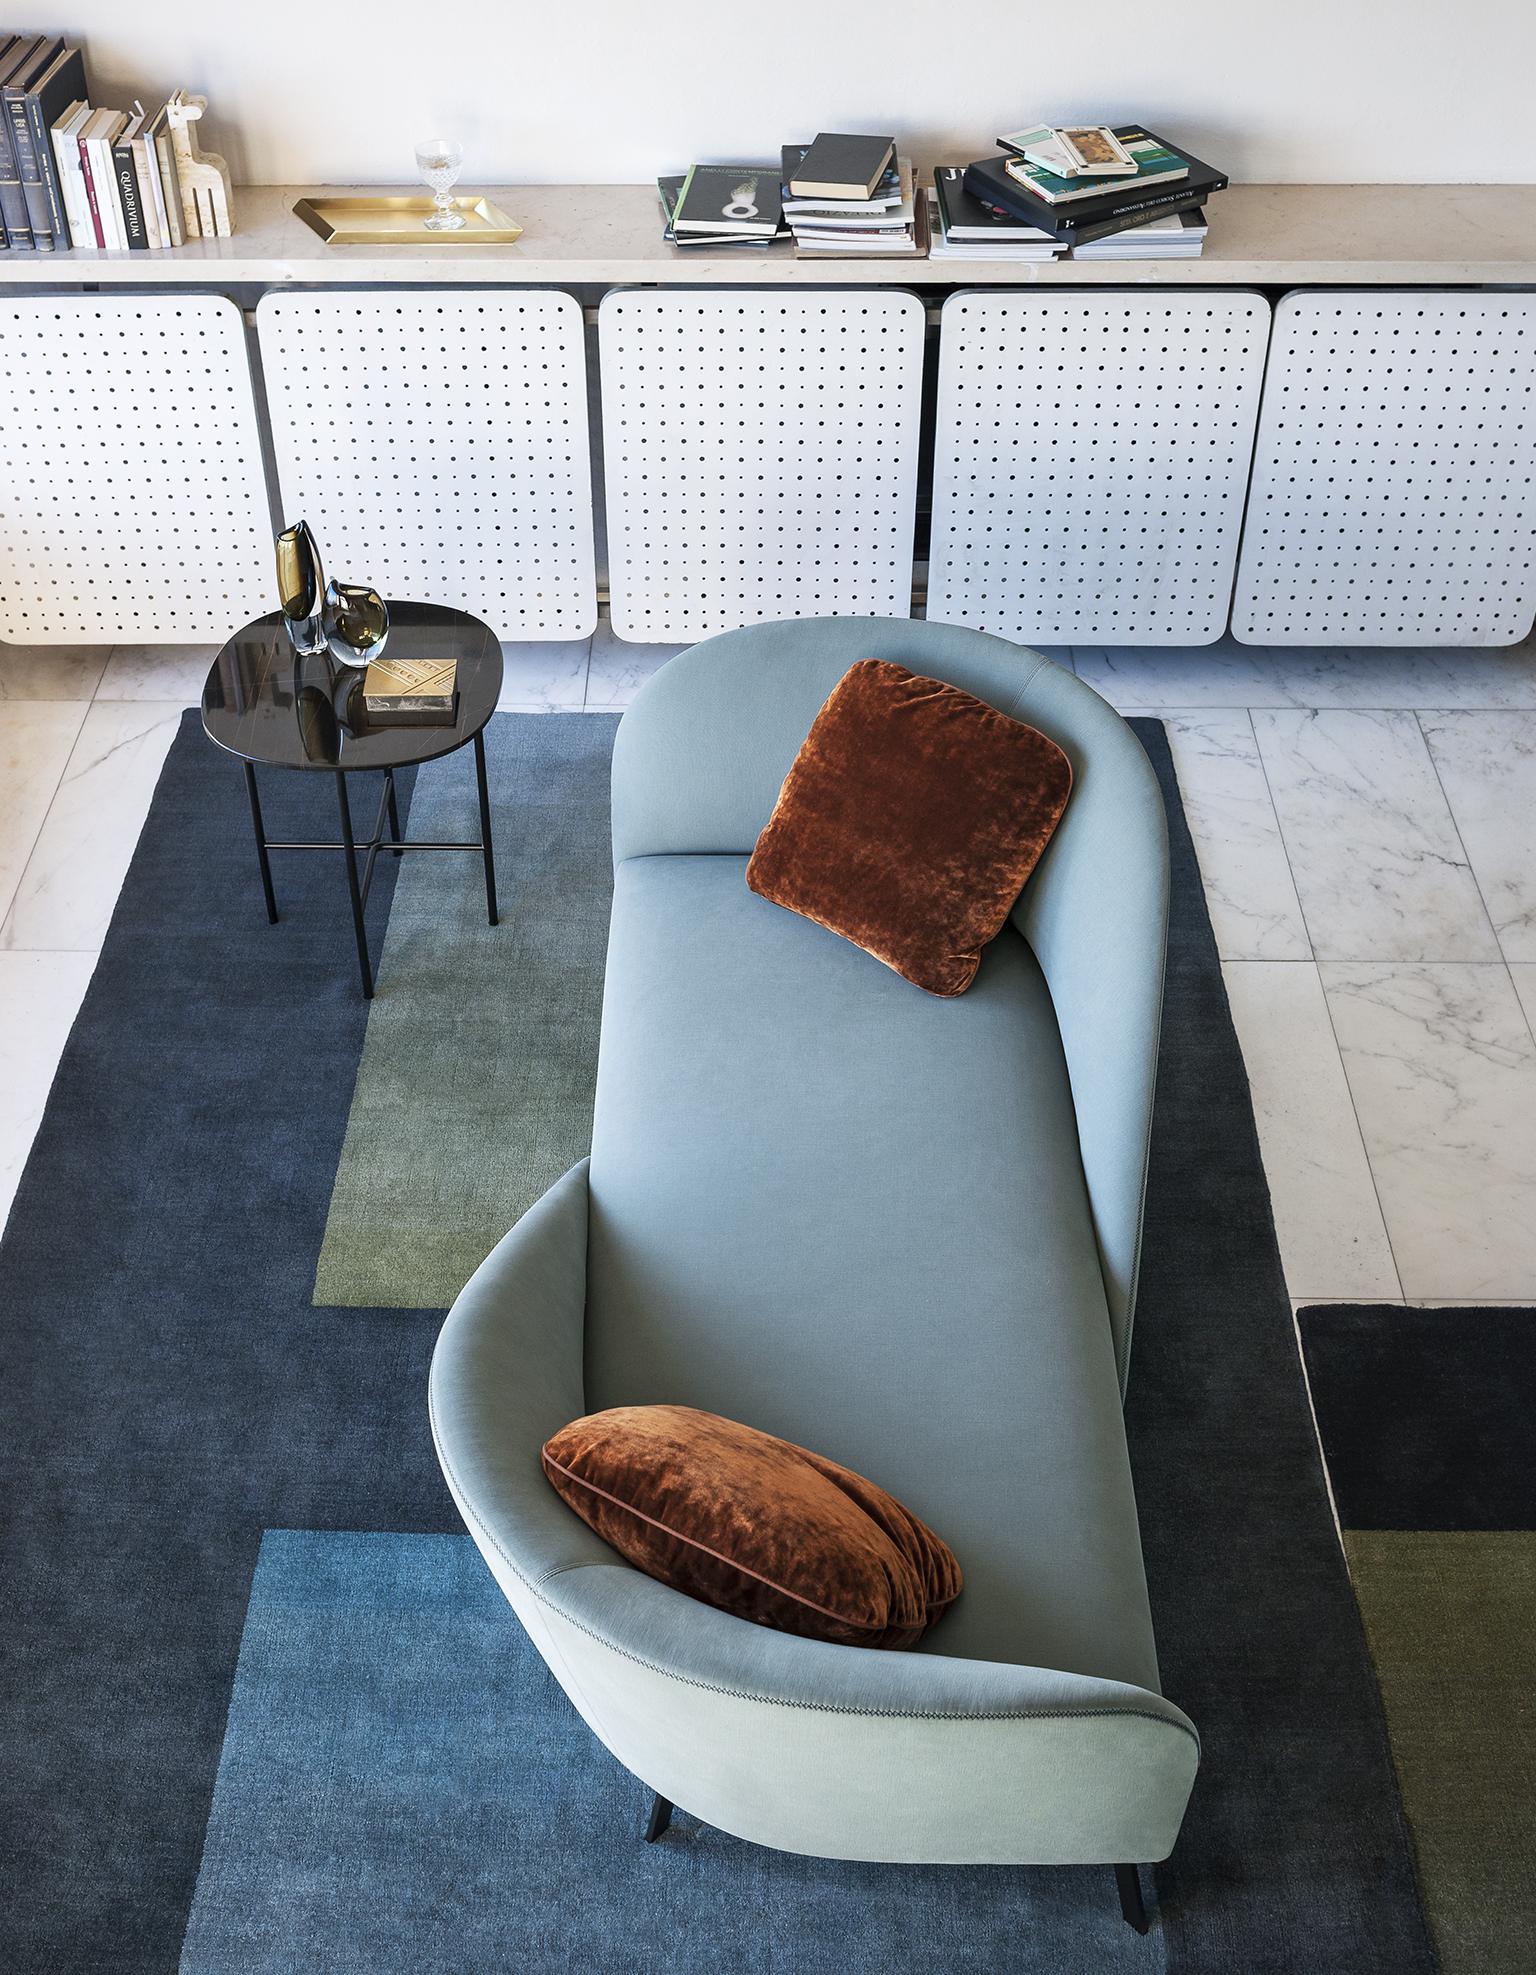 Modern Tacchini Face to Face Sofa with Cushion in Calantha Fabric by Gordon Guillaumier